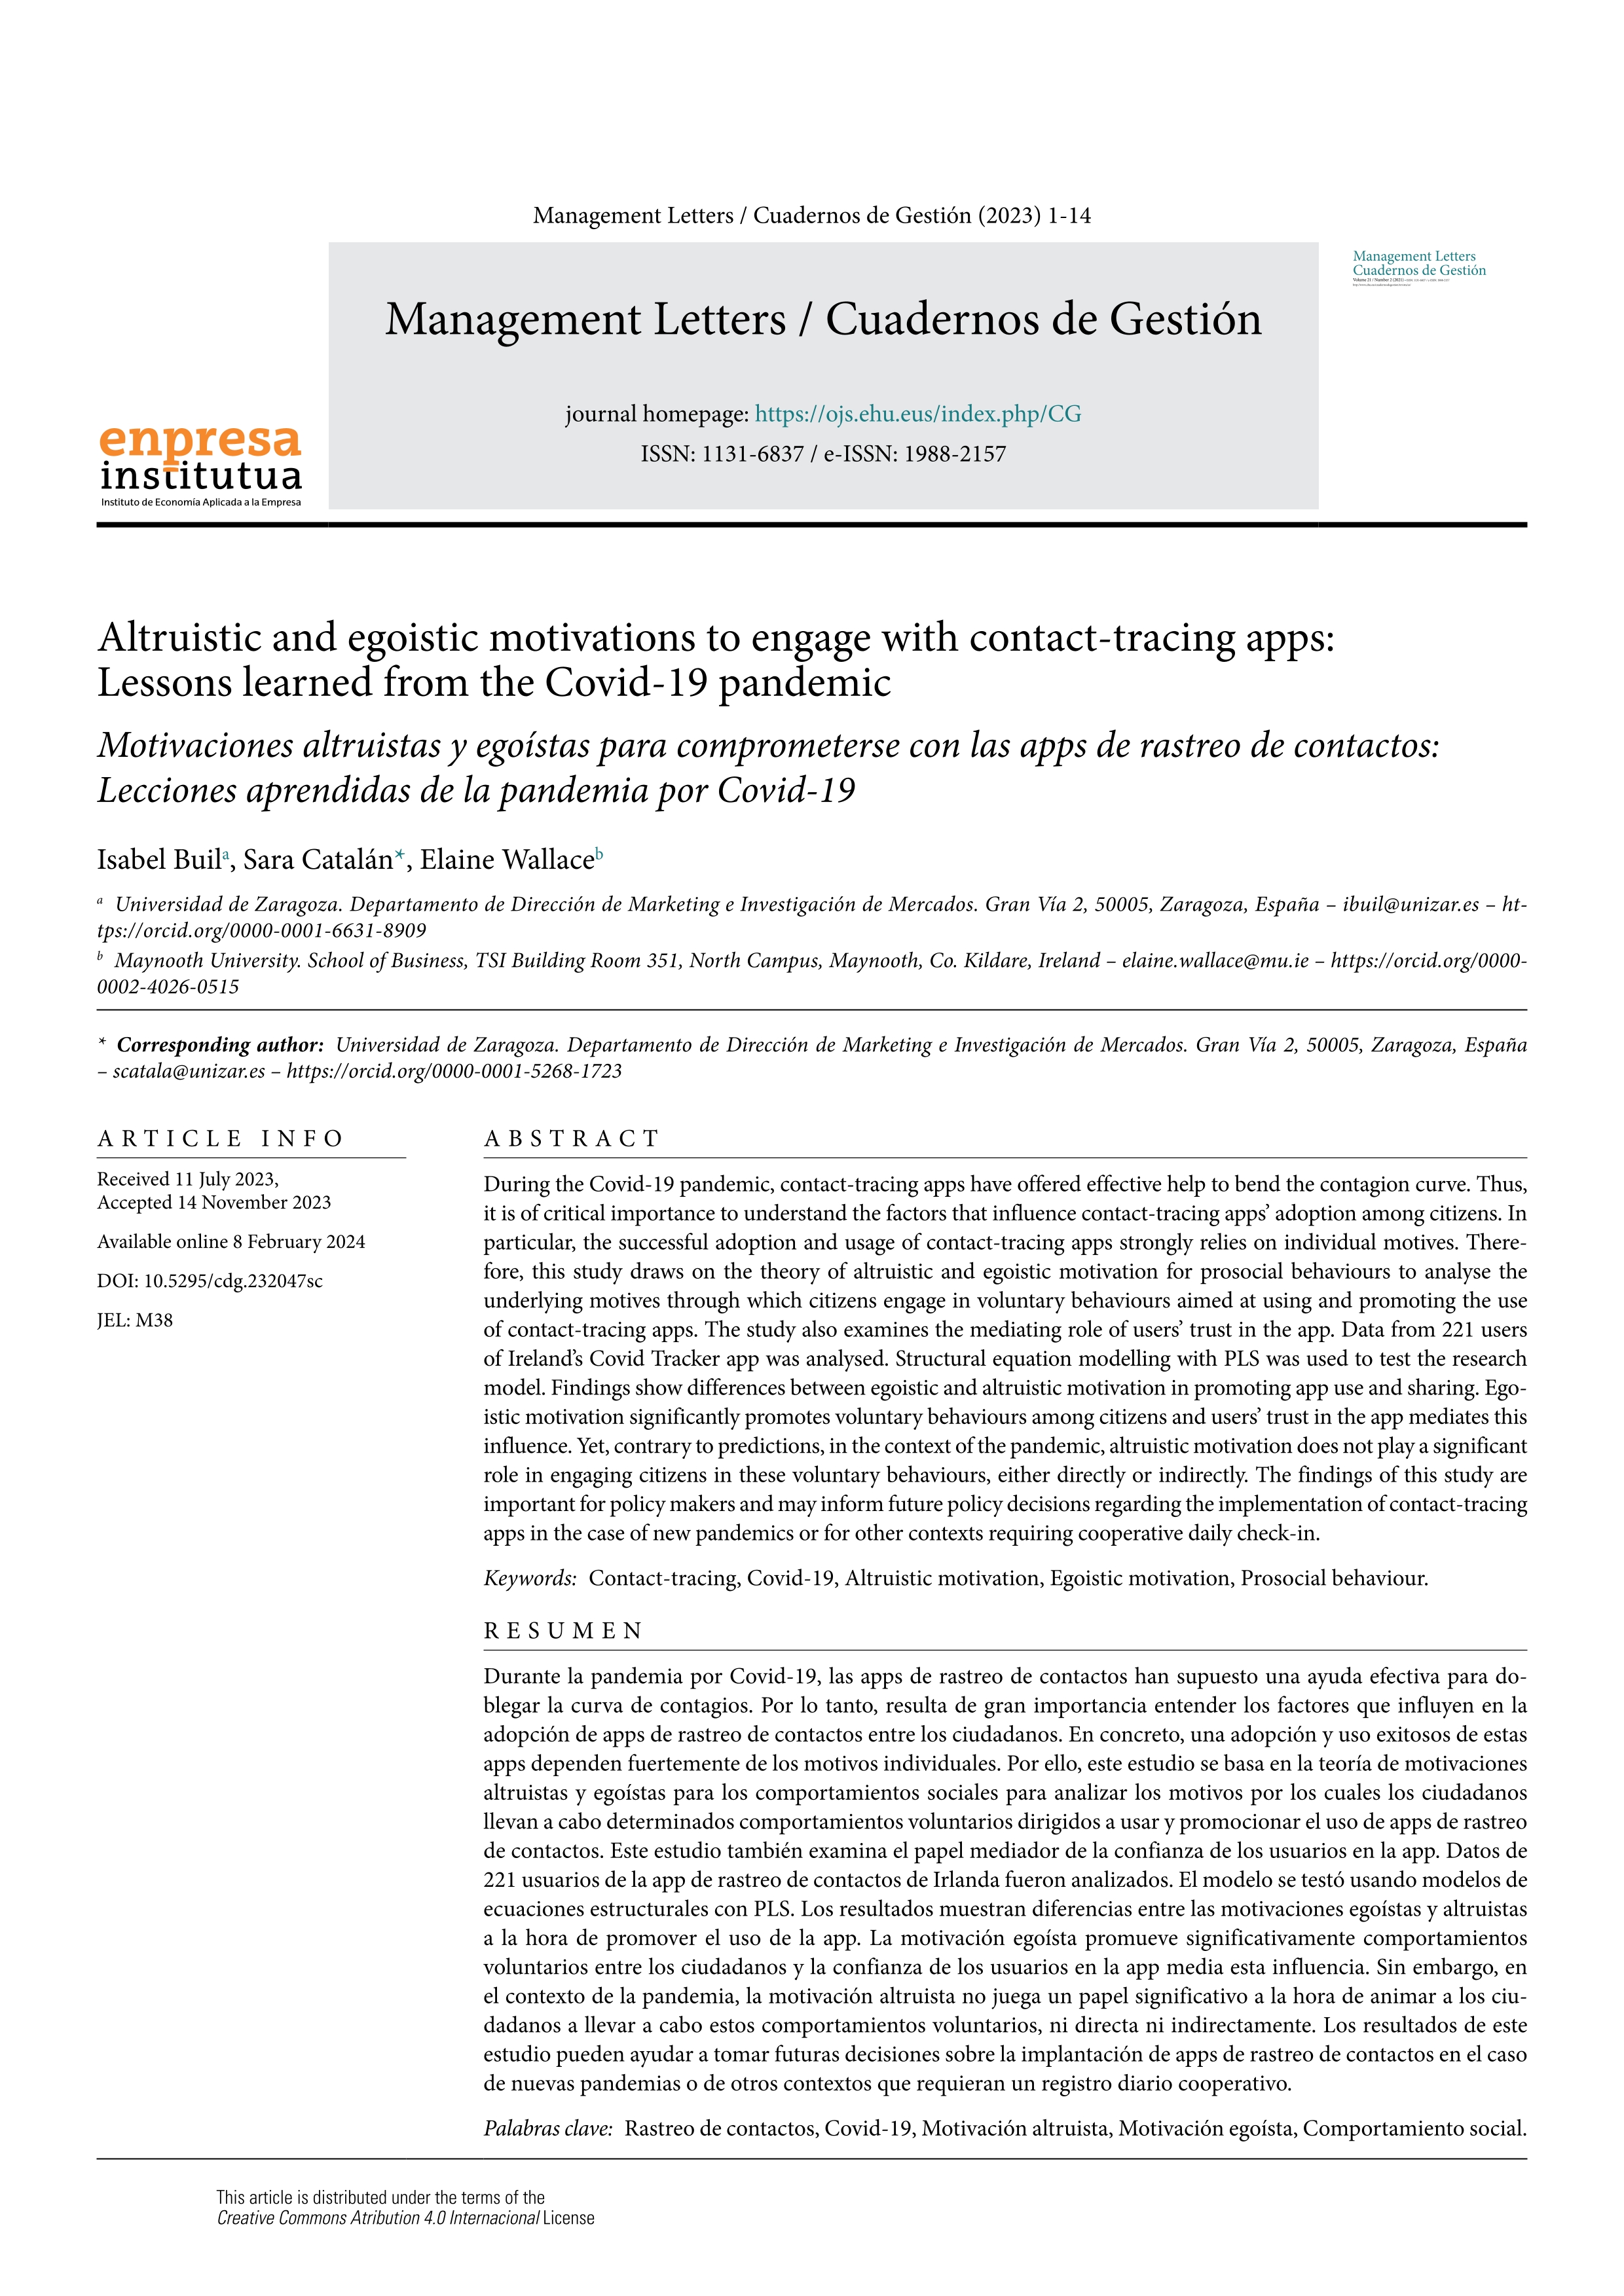 Altruistic and egoistic motivations to engage with contact-tracing apps:  Lessons learned from the Covid-19 pandemic